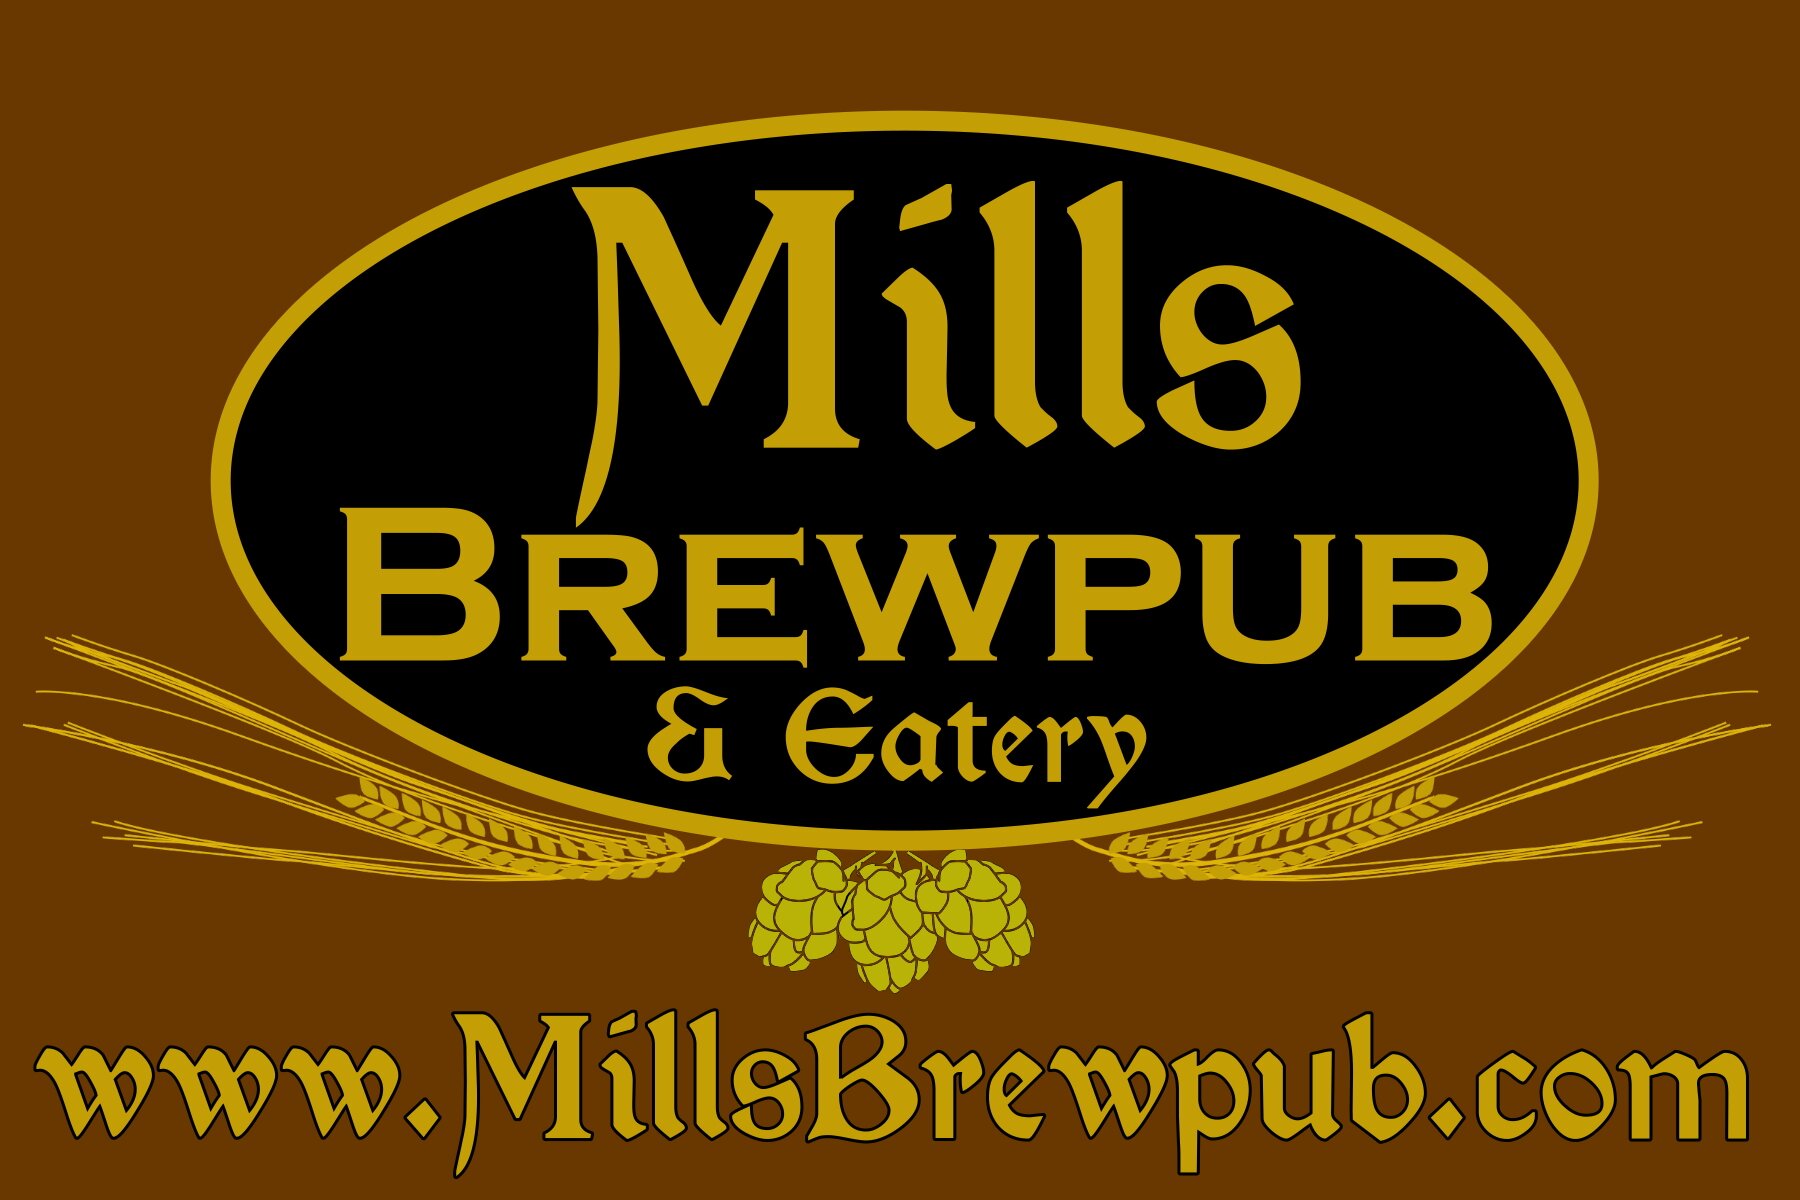 Mills Brewpub & Eatery in the Mills50 District of Downtow Orlando brings you gastropub fare and an extensive beer and wine list. Come in for a bite and a pint!